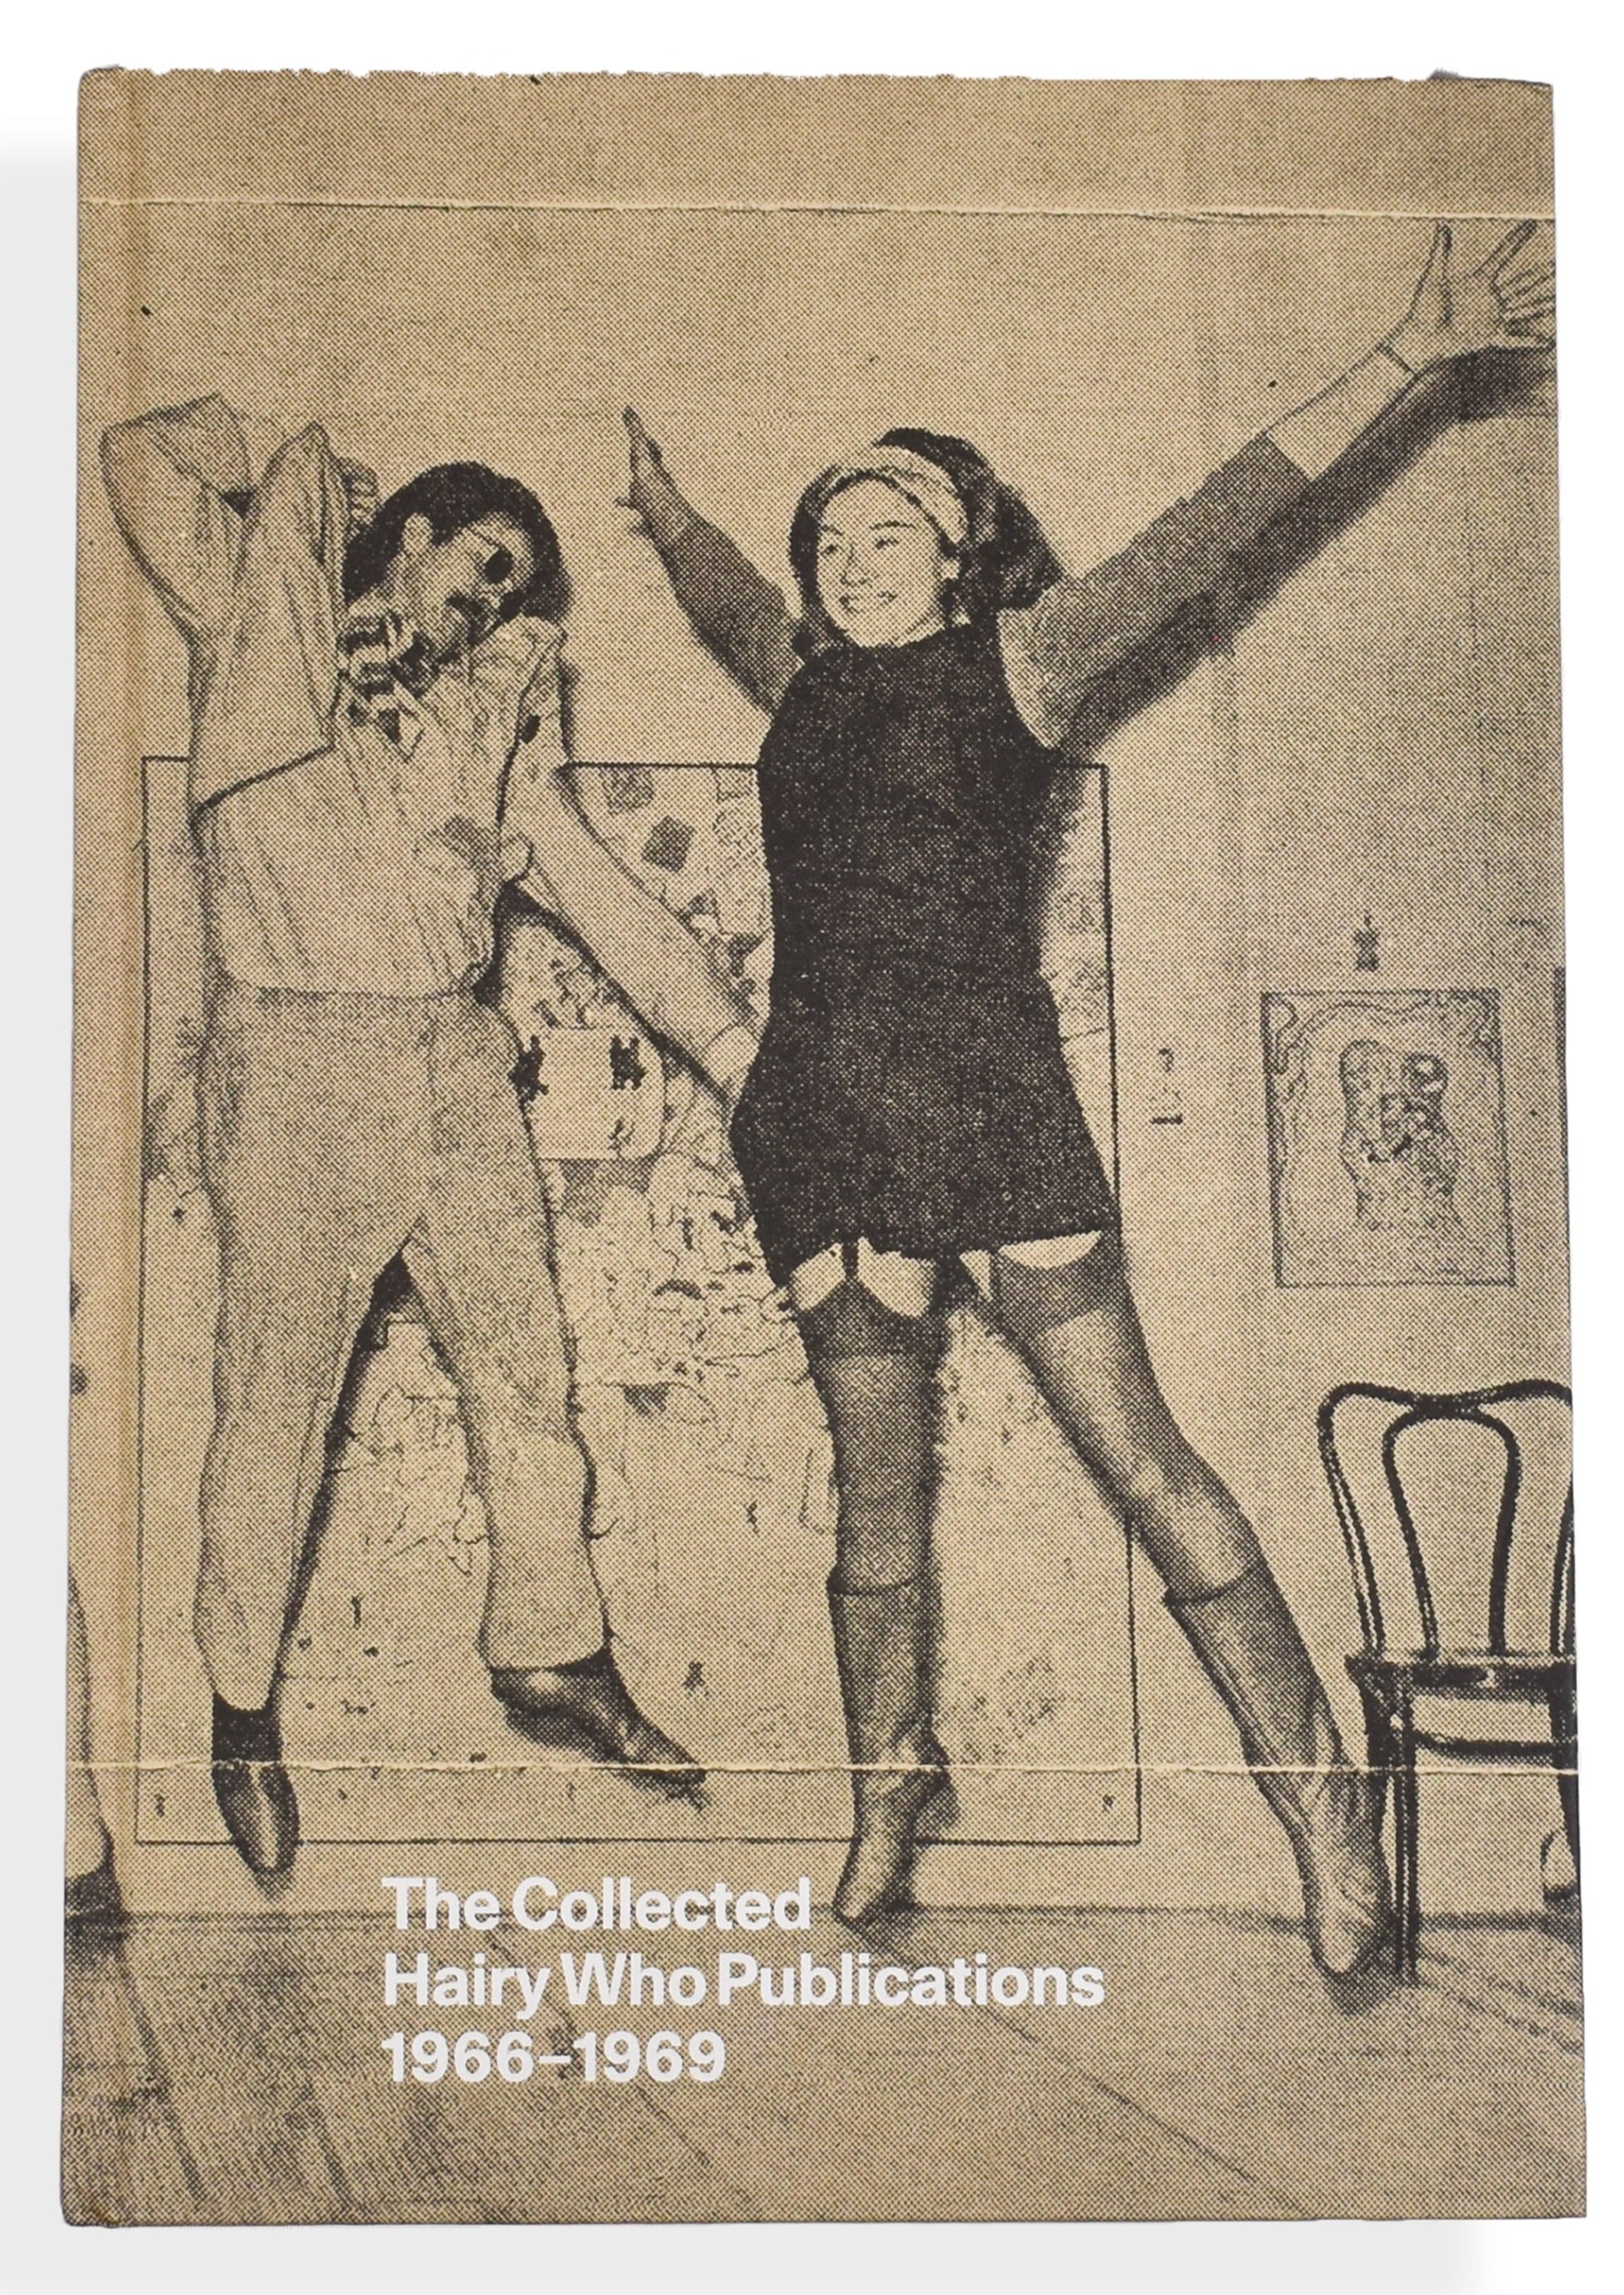 The Collected Hairy Who Publications 1966-1969 – Judi Rosen